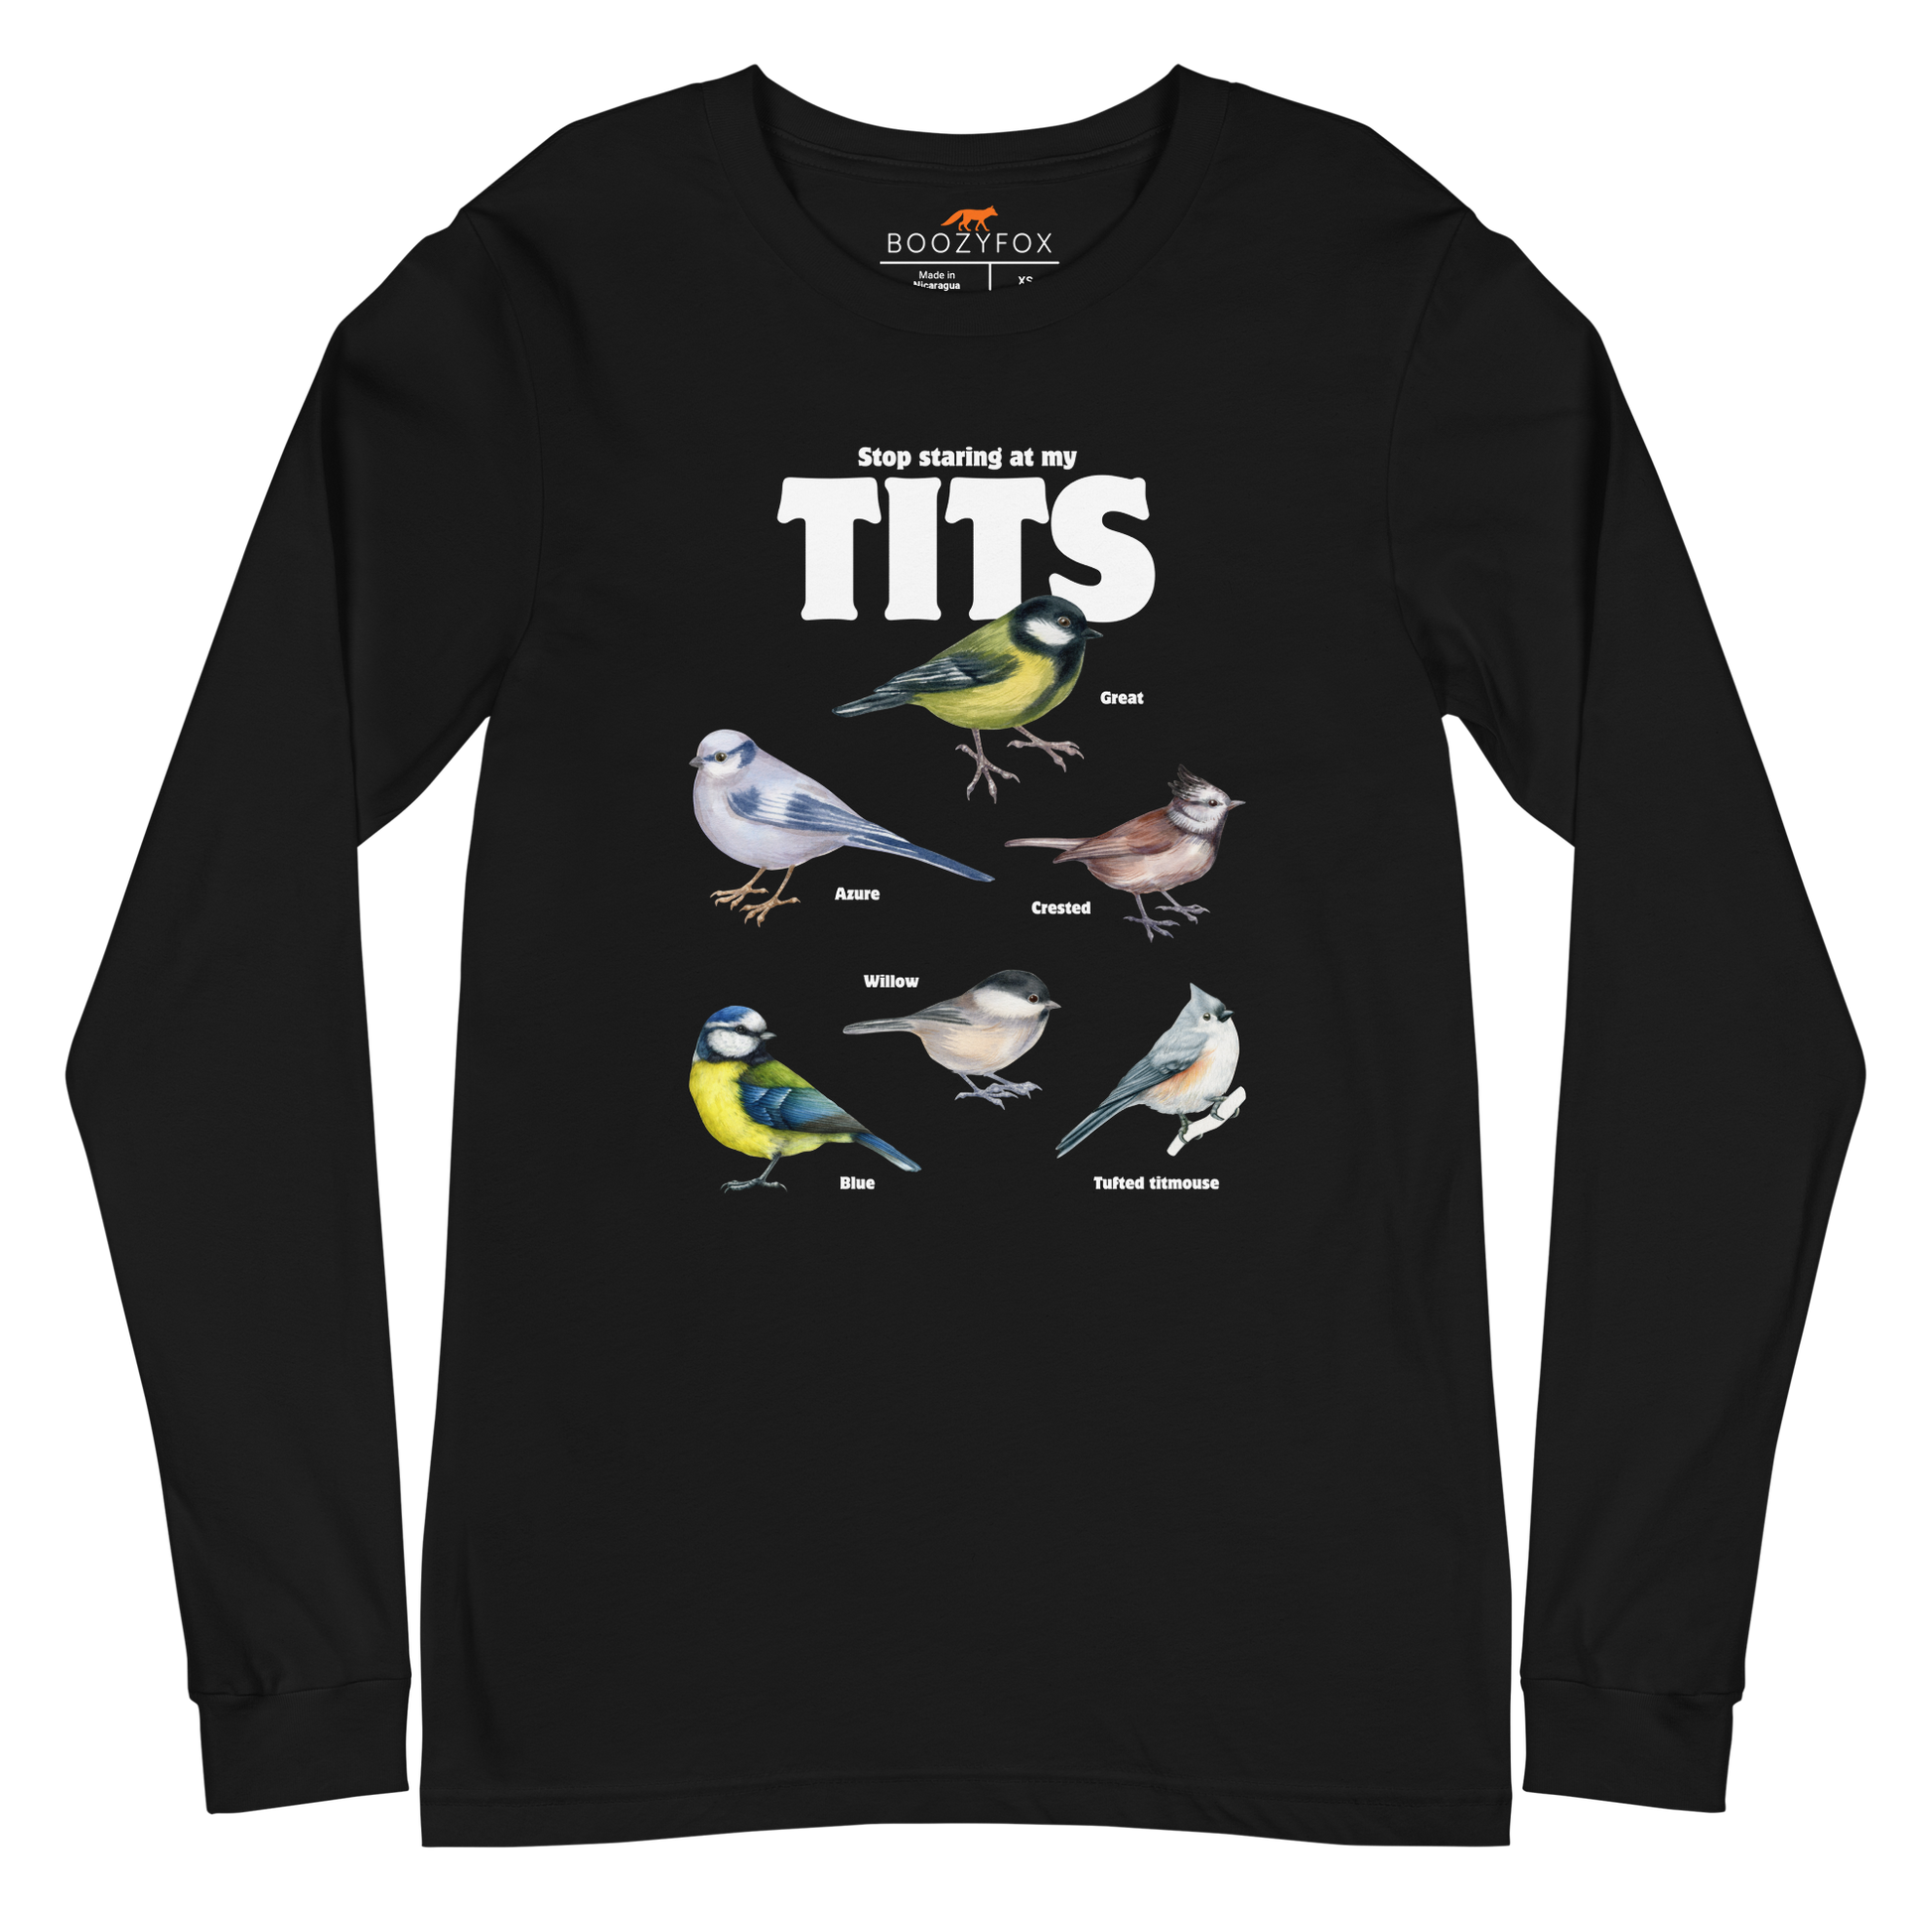 Black Tit Long Sleeve Tee featuring a funny Stop Staring At My Tits graphic on the chest - Funny Tit Bird Long Sleeve Graphic Tees - Boozy Fox